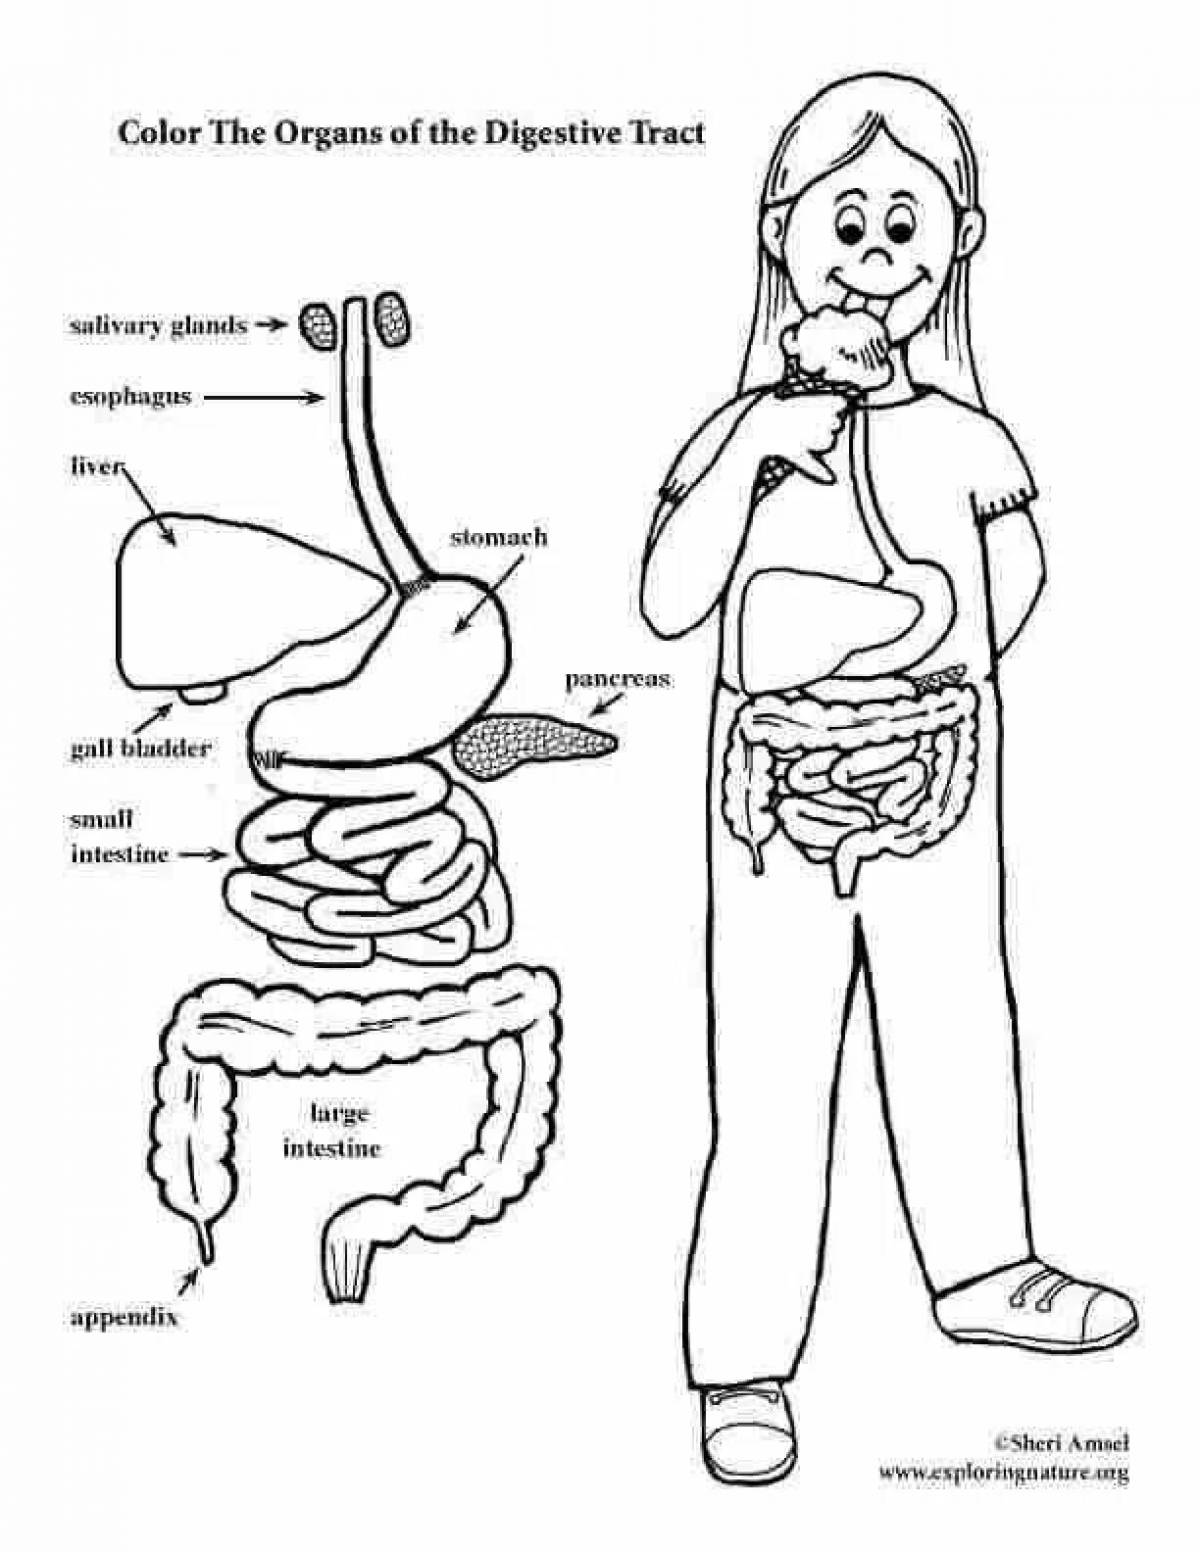 A fun coloring of the digestive system